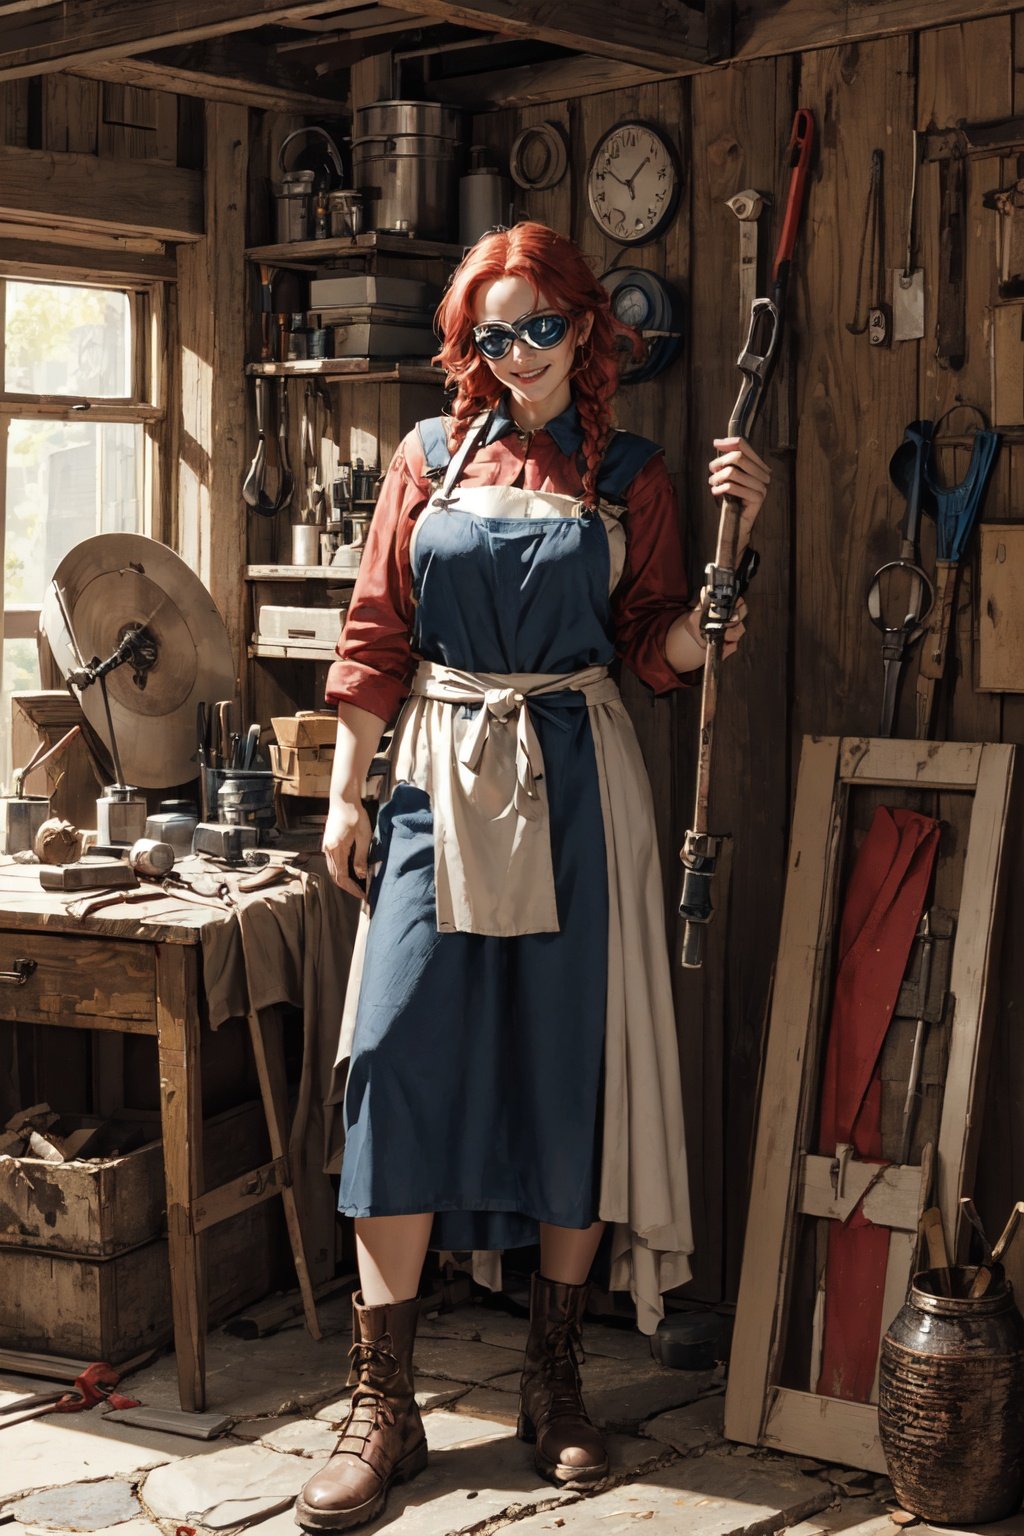 Race: Dwarven engineerAppearance: Stocky build, braided red hair, goggles pushed up on the foreheadOutfit: Sturdy leather apron over practical clothing, tools hanging from beltsPose: Standing next to a massive mechanical invention, holding a wrench with a satisfied grin